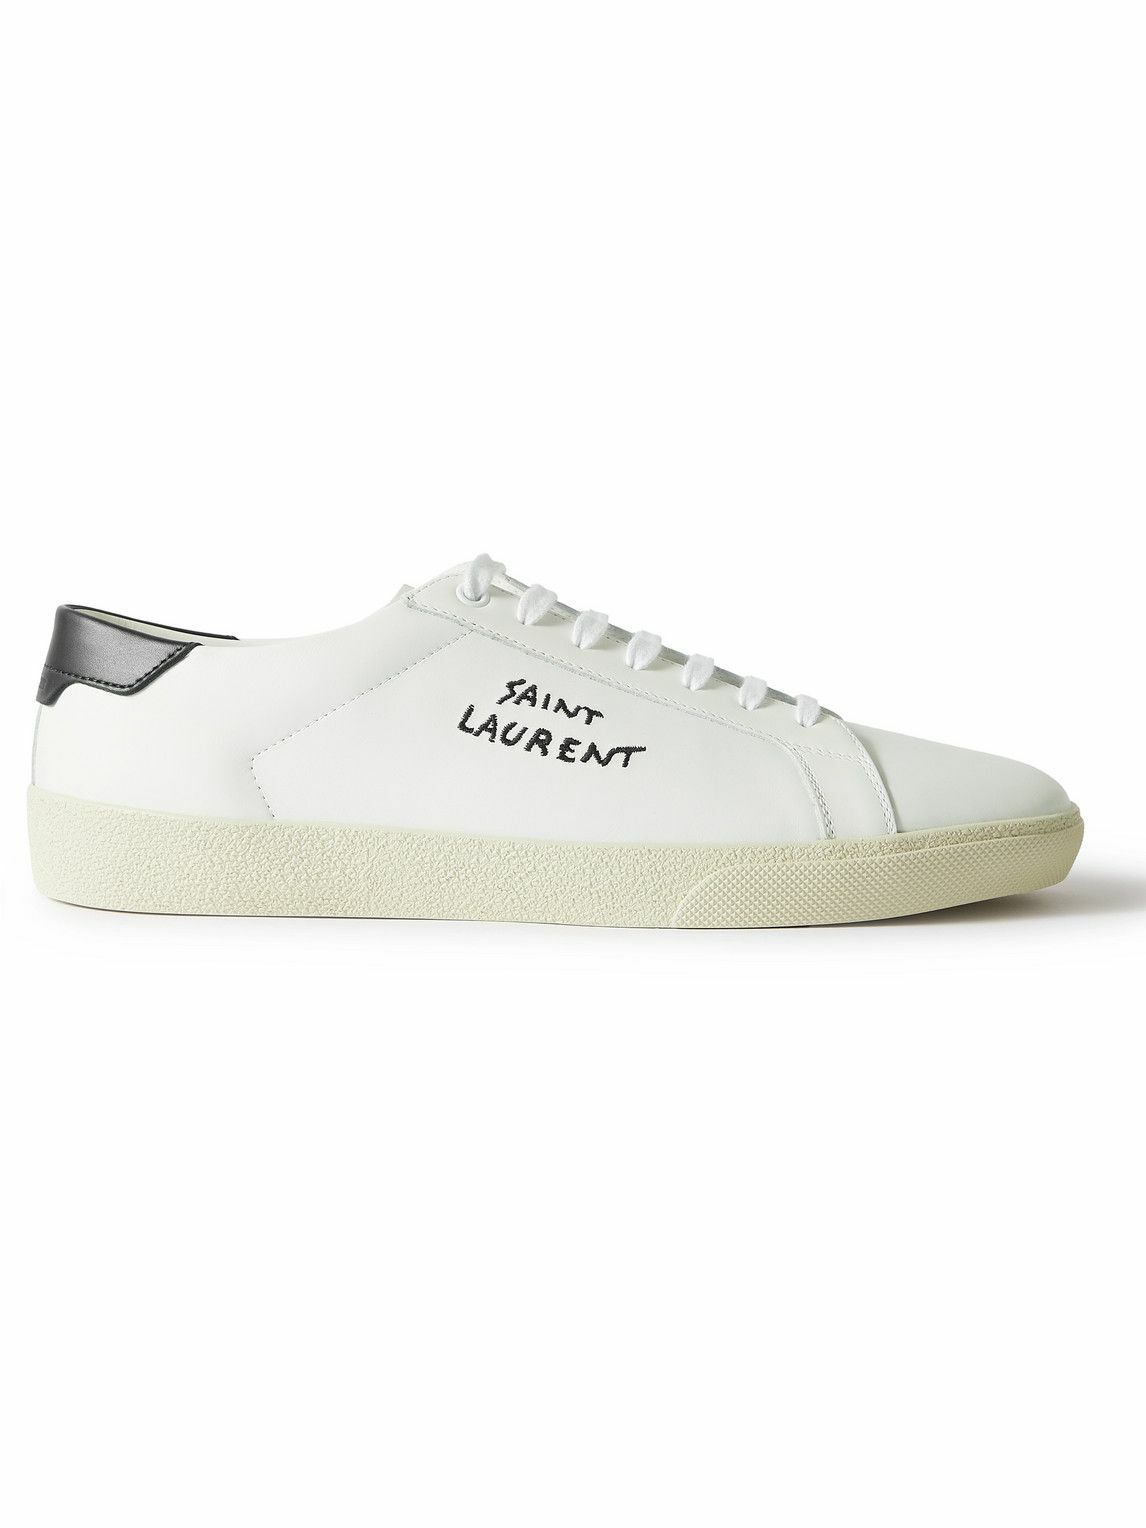 SAINT LAURENT - Court Classic Logo-Embroidered Leather Sneakers - White ...